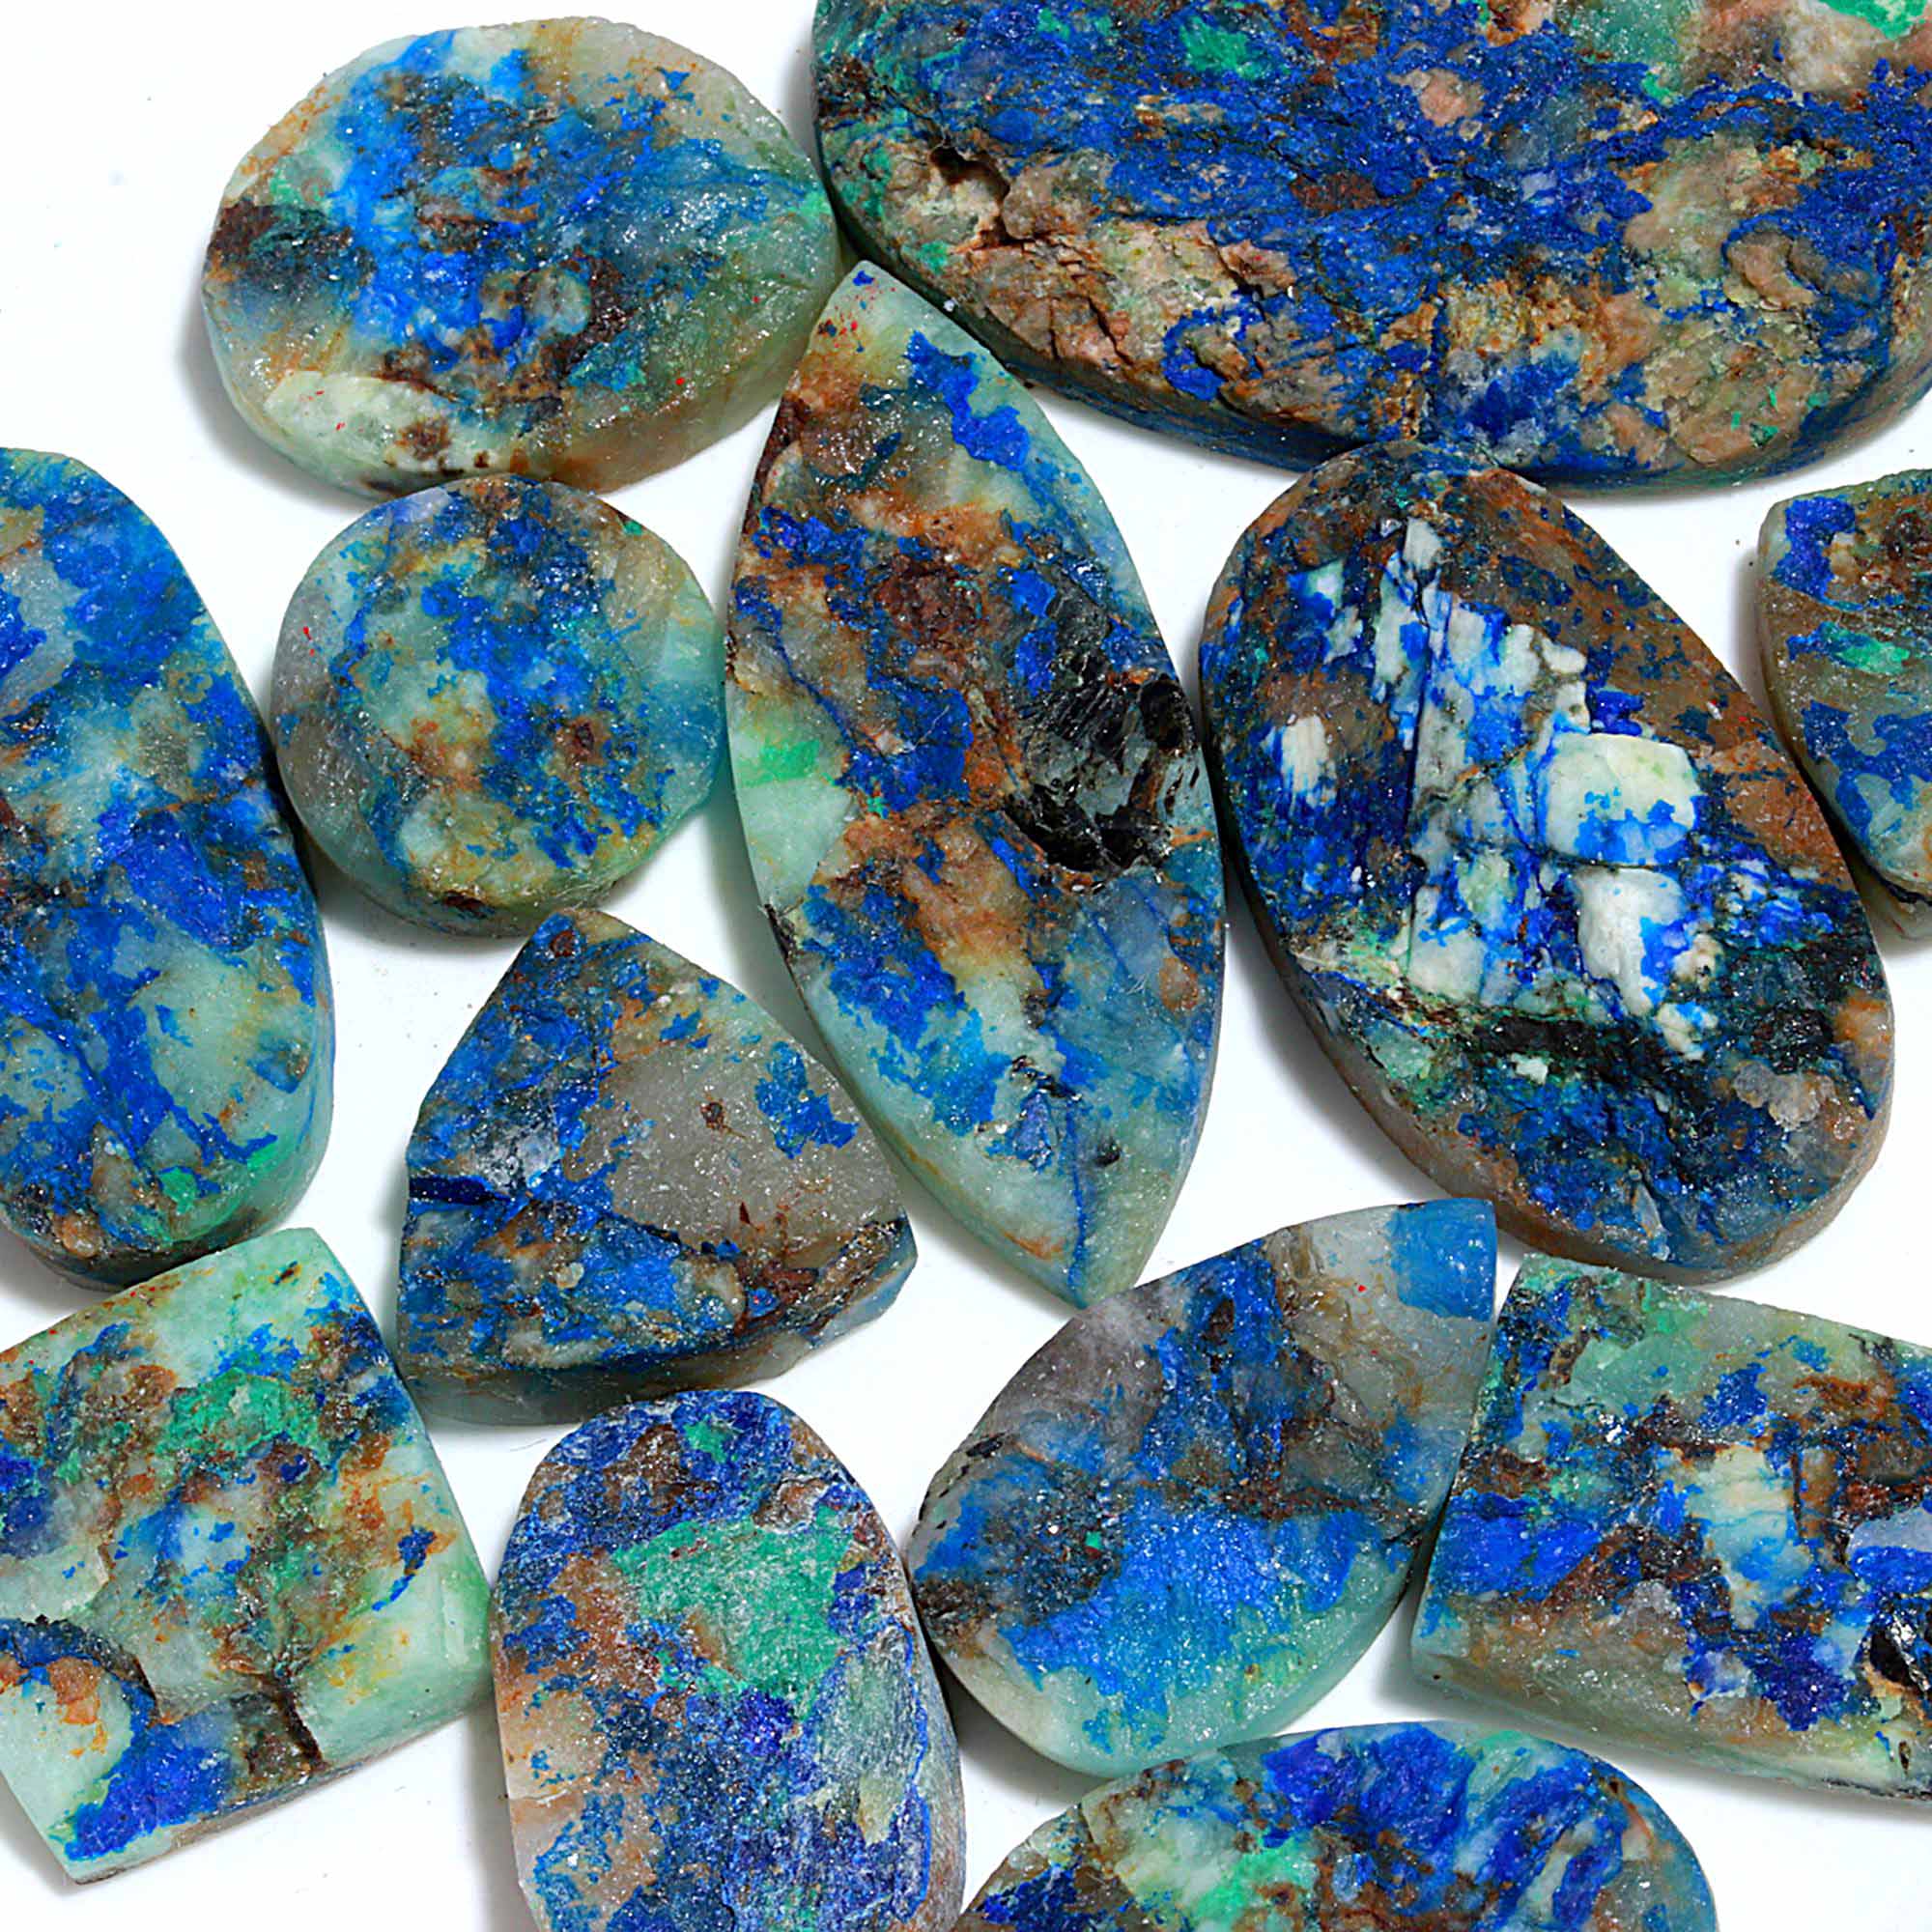 13 Pcs 468.Cts Natural Azurite Druzy Unpolished Loose Cabochon Gemstone For Jewelry Wholesale Lot Size 48x27 18x19mm